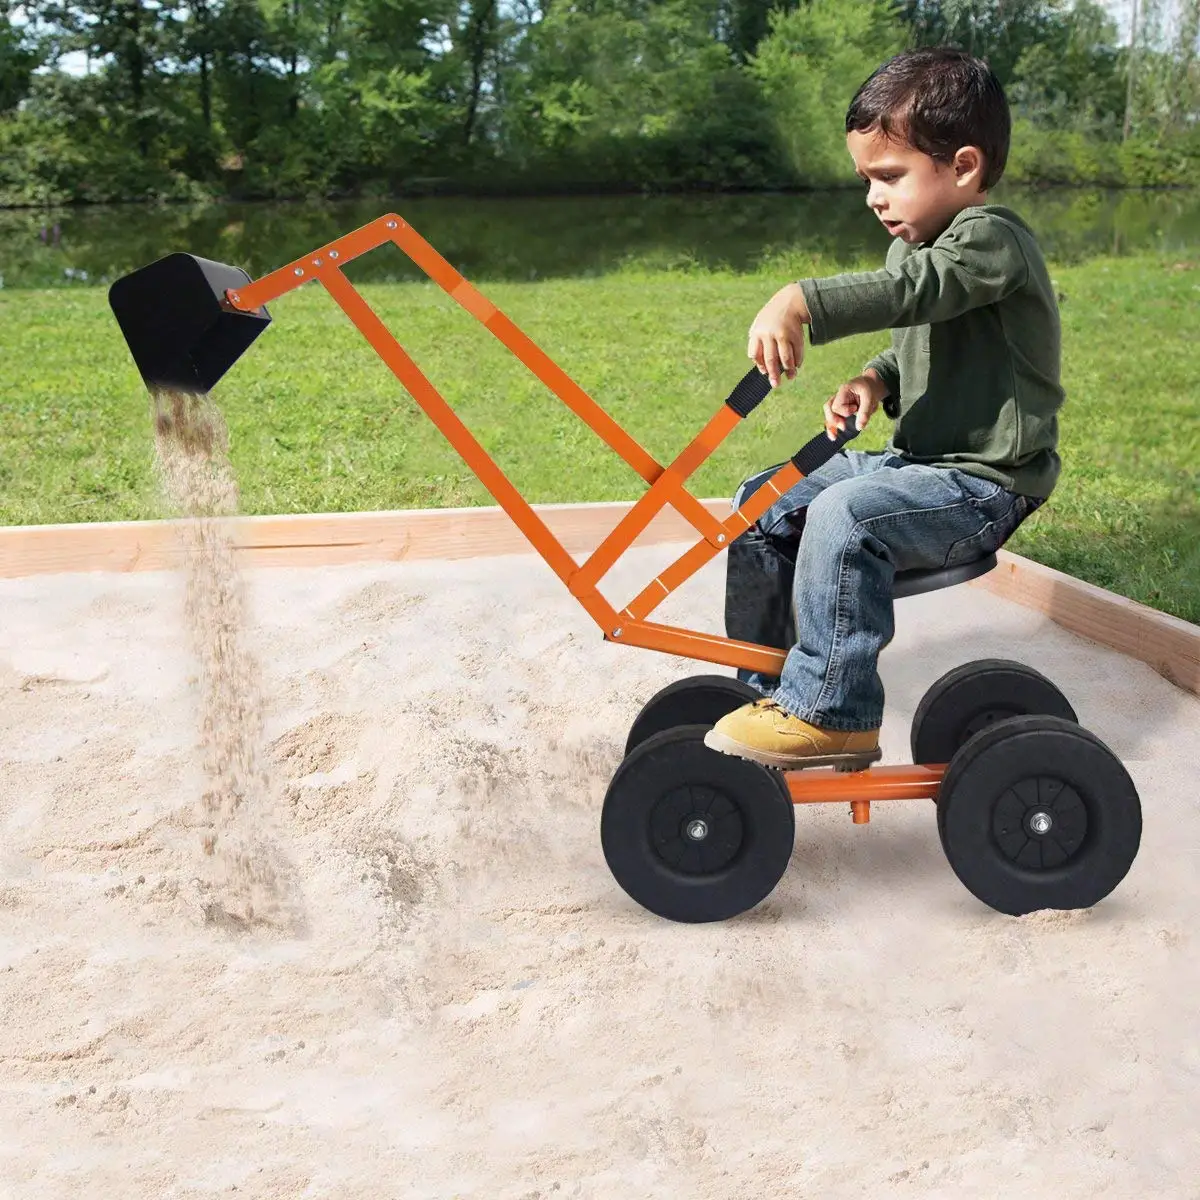 Ride on Crane Digger Swing and Grab Funct for sale online Mechanical Digging Metal Outdoor Toy 